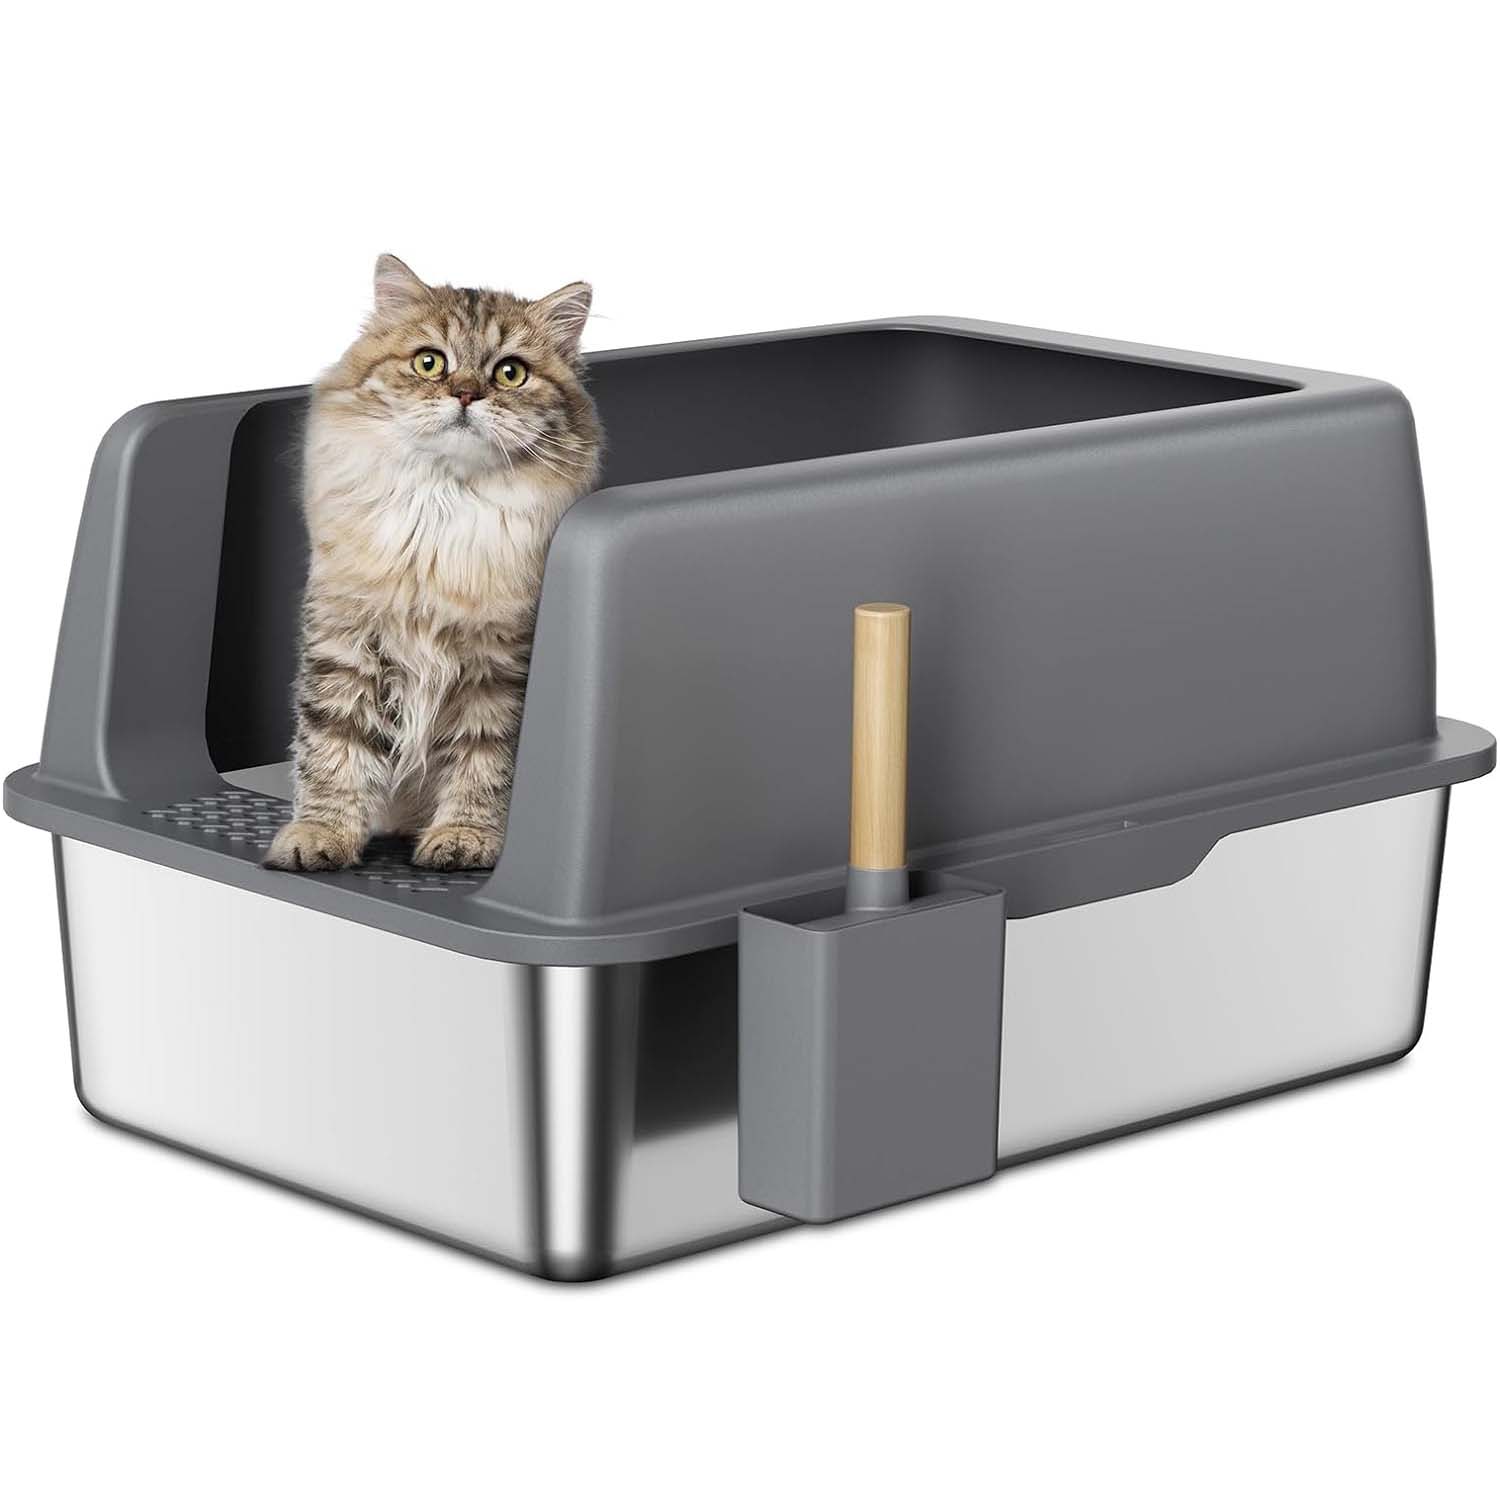 

Stainless Steel Semi-enclosed Xl Cat Litter Box, Leak-proof, Easy To Clean, To Prevent Cat Litter Splash